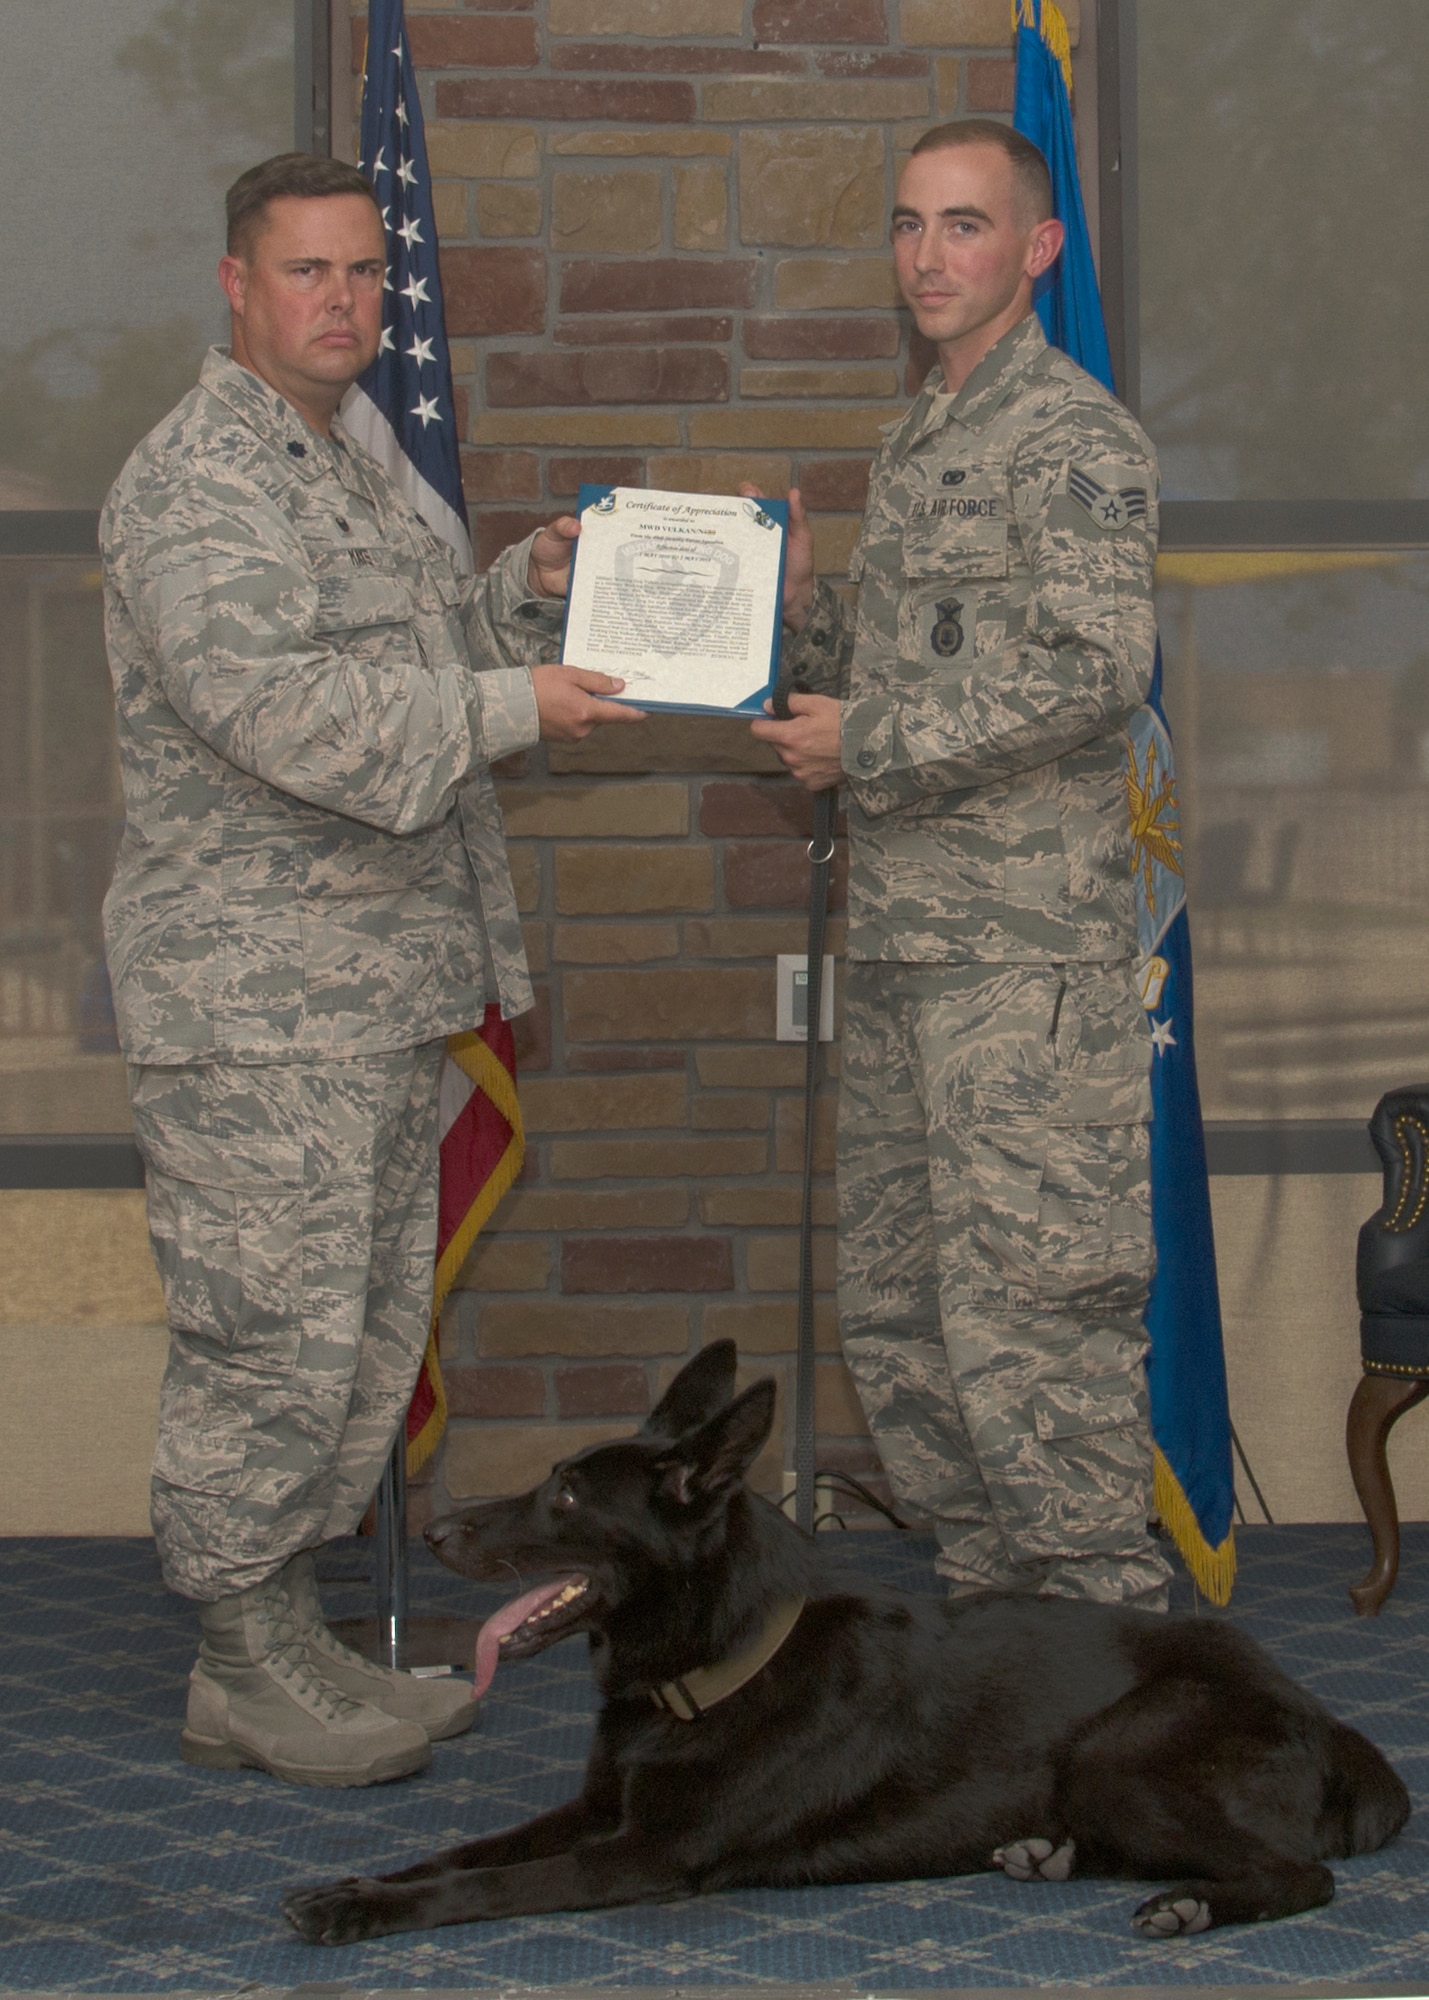 Vulkan, military working dog for the 49th Security Forces Squadron, receives a certificate of appreciation during his retirement ceremony at Holloman Air Force Base, N.M., July 27, 2018. Vulkan contributed to securing and defending 17,000 personnel that live and work on Holloman.